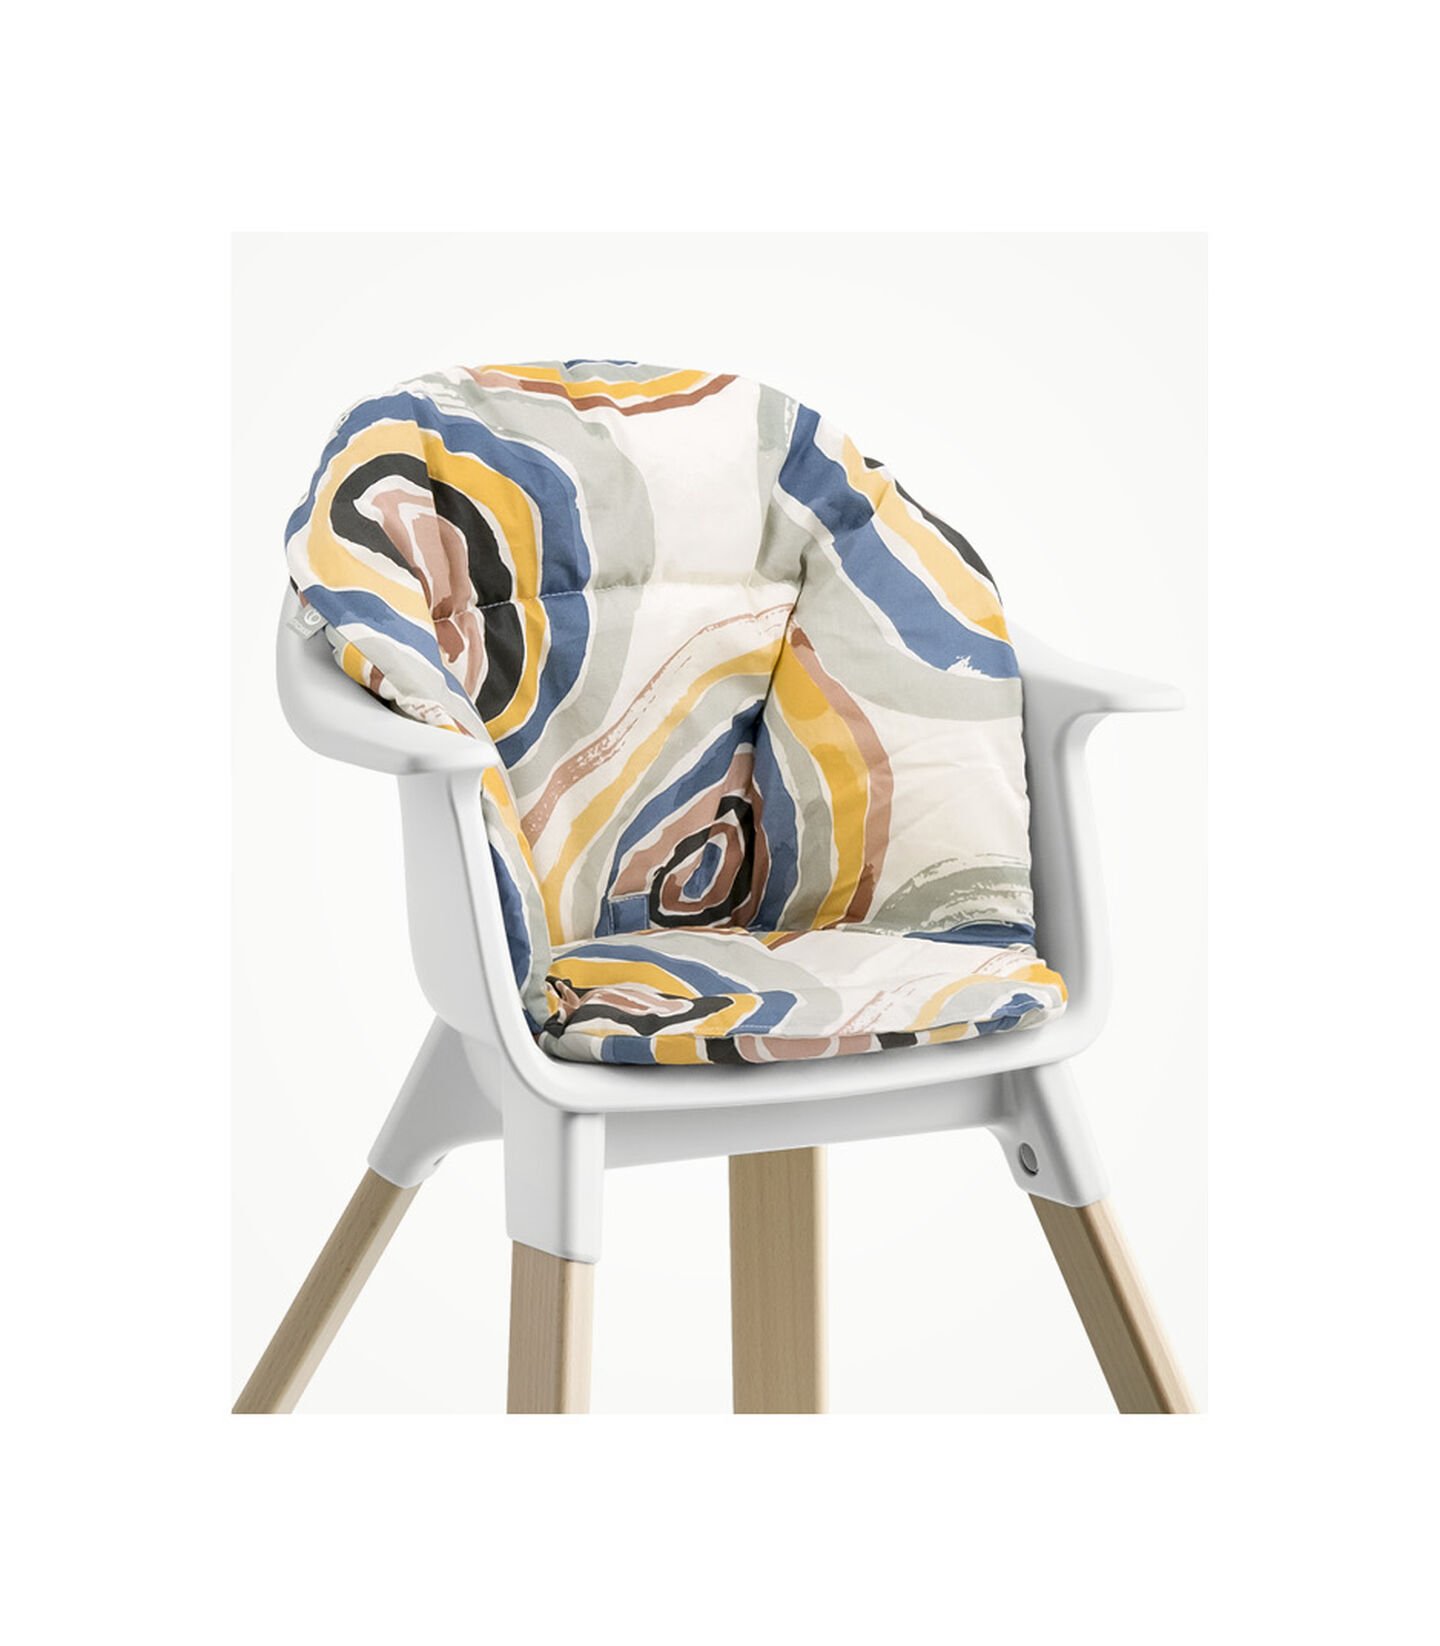 Stokke® Clikk™ High Chair Natural and White, with Cushion Multi Circle. view 3